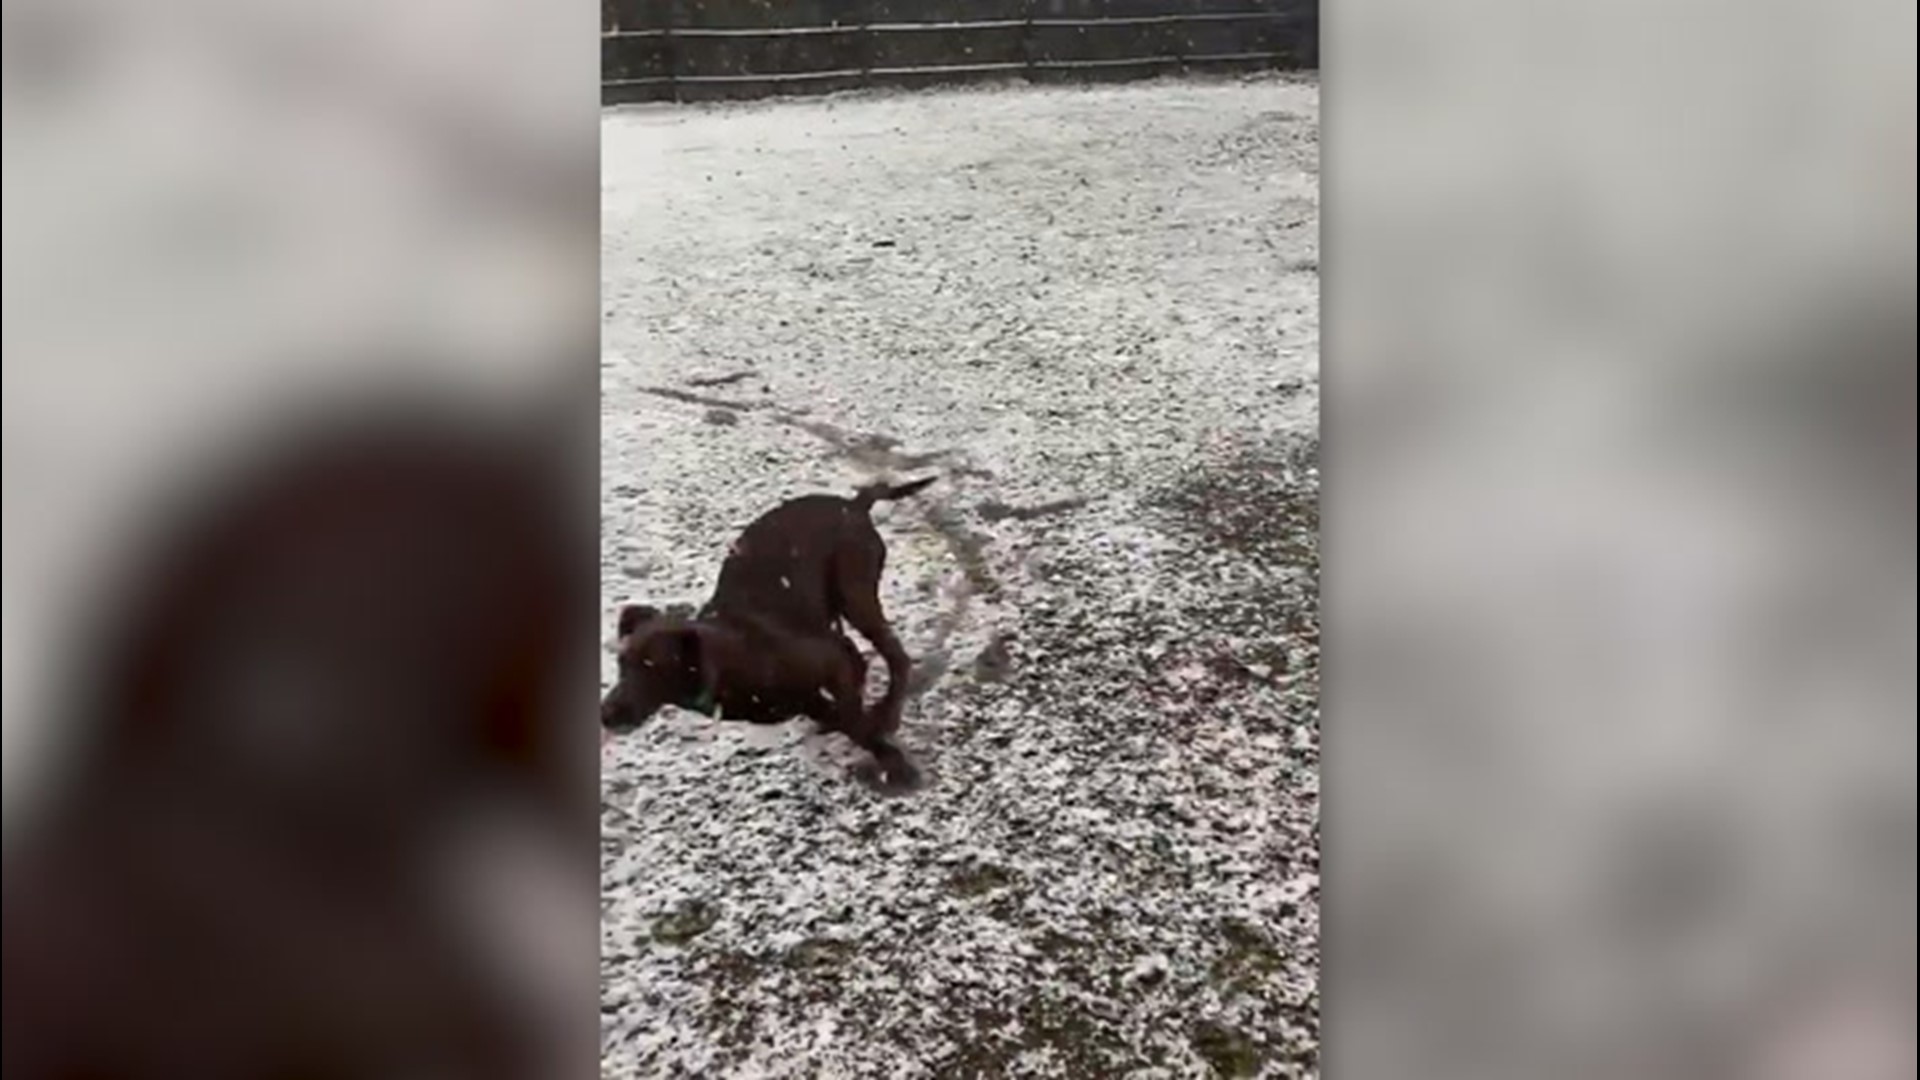 Harper the dog experienced snow for the first time ever on Nov. 30 in Alabama and did what most dogs would do: immediately run around and play in it.